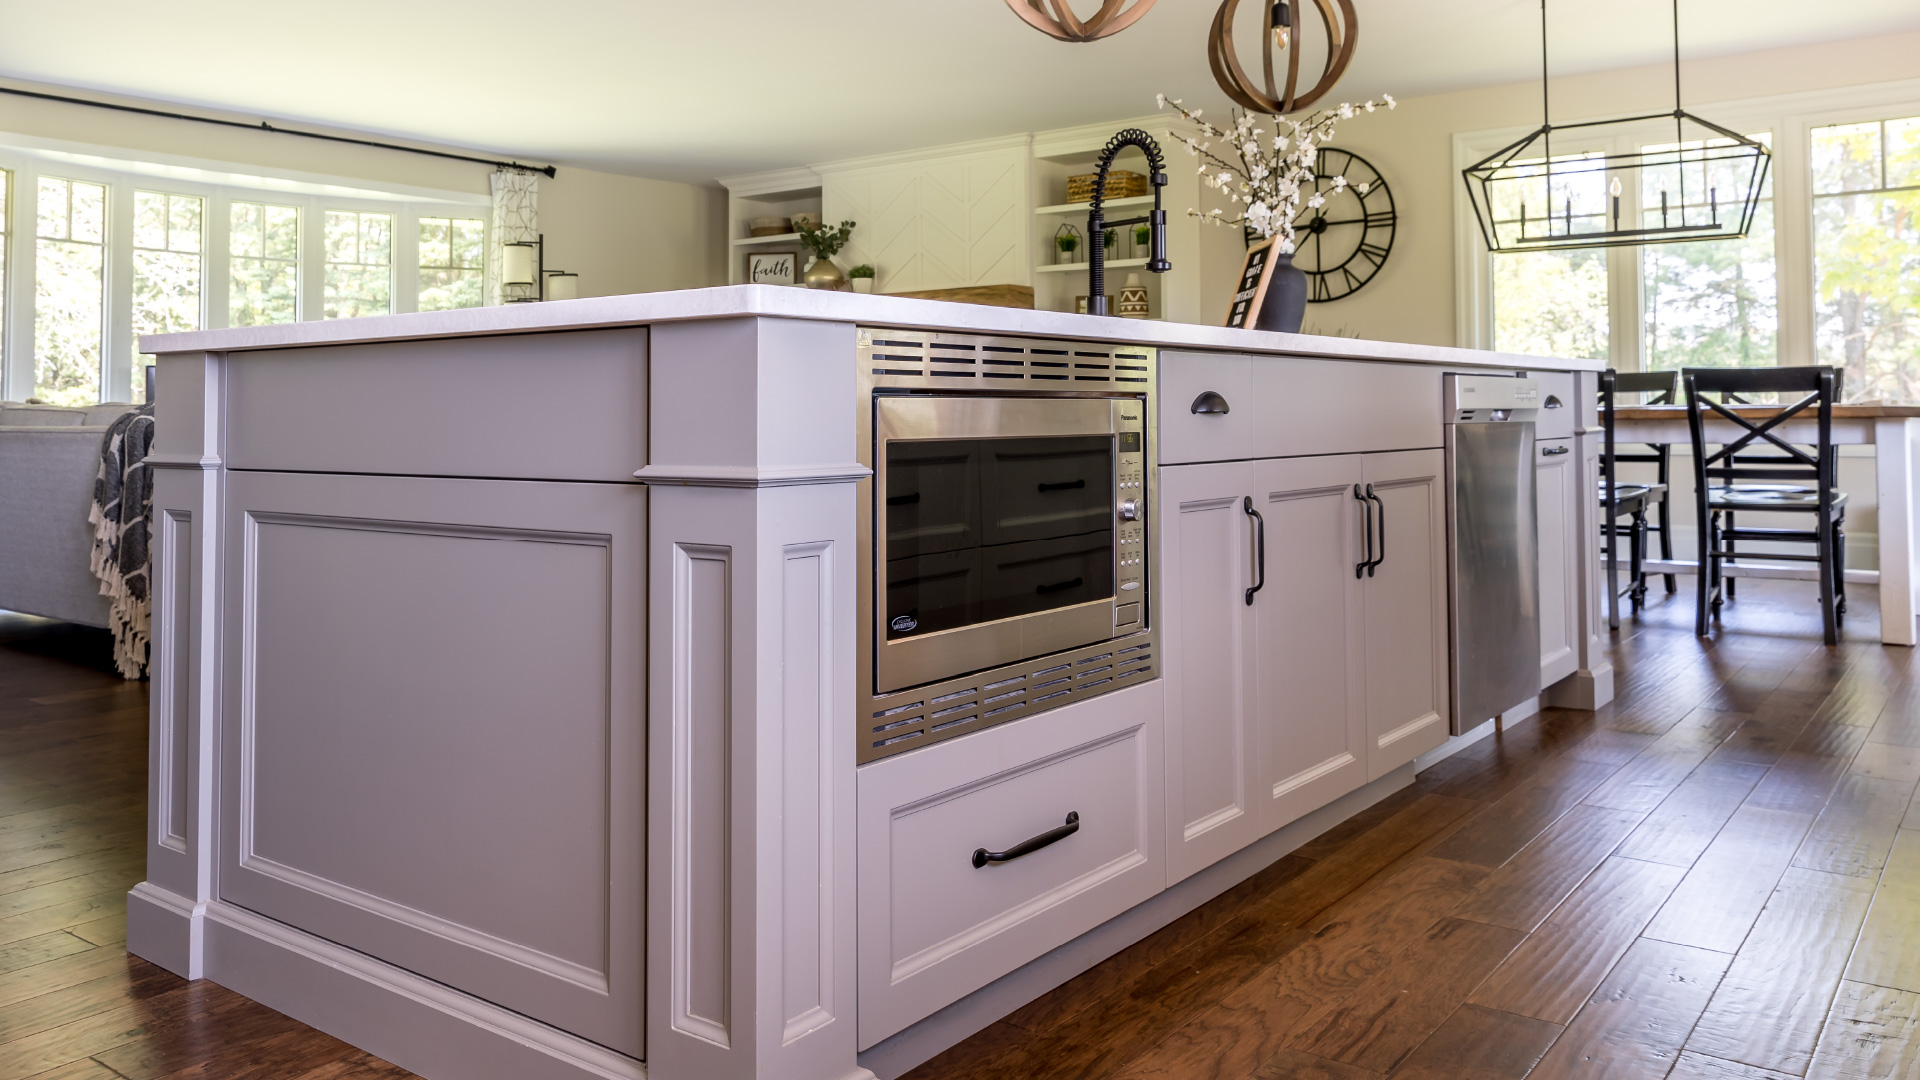 A large custom kitchen island with a built in microwave